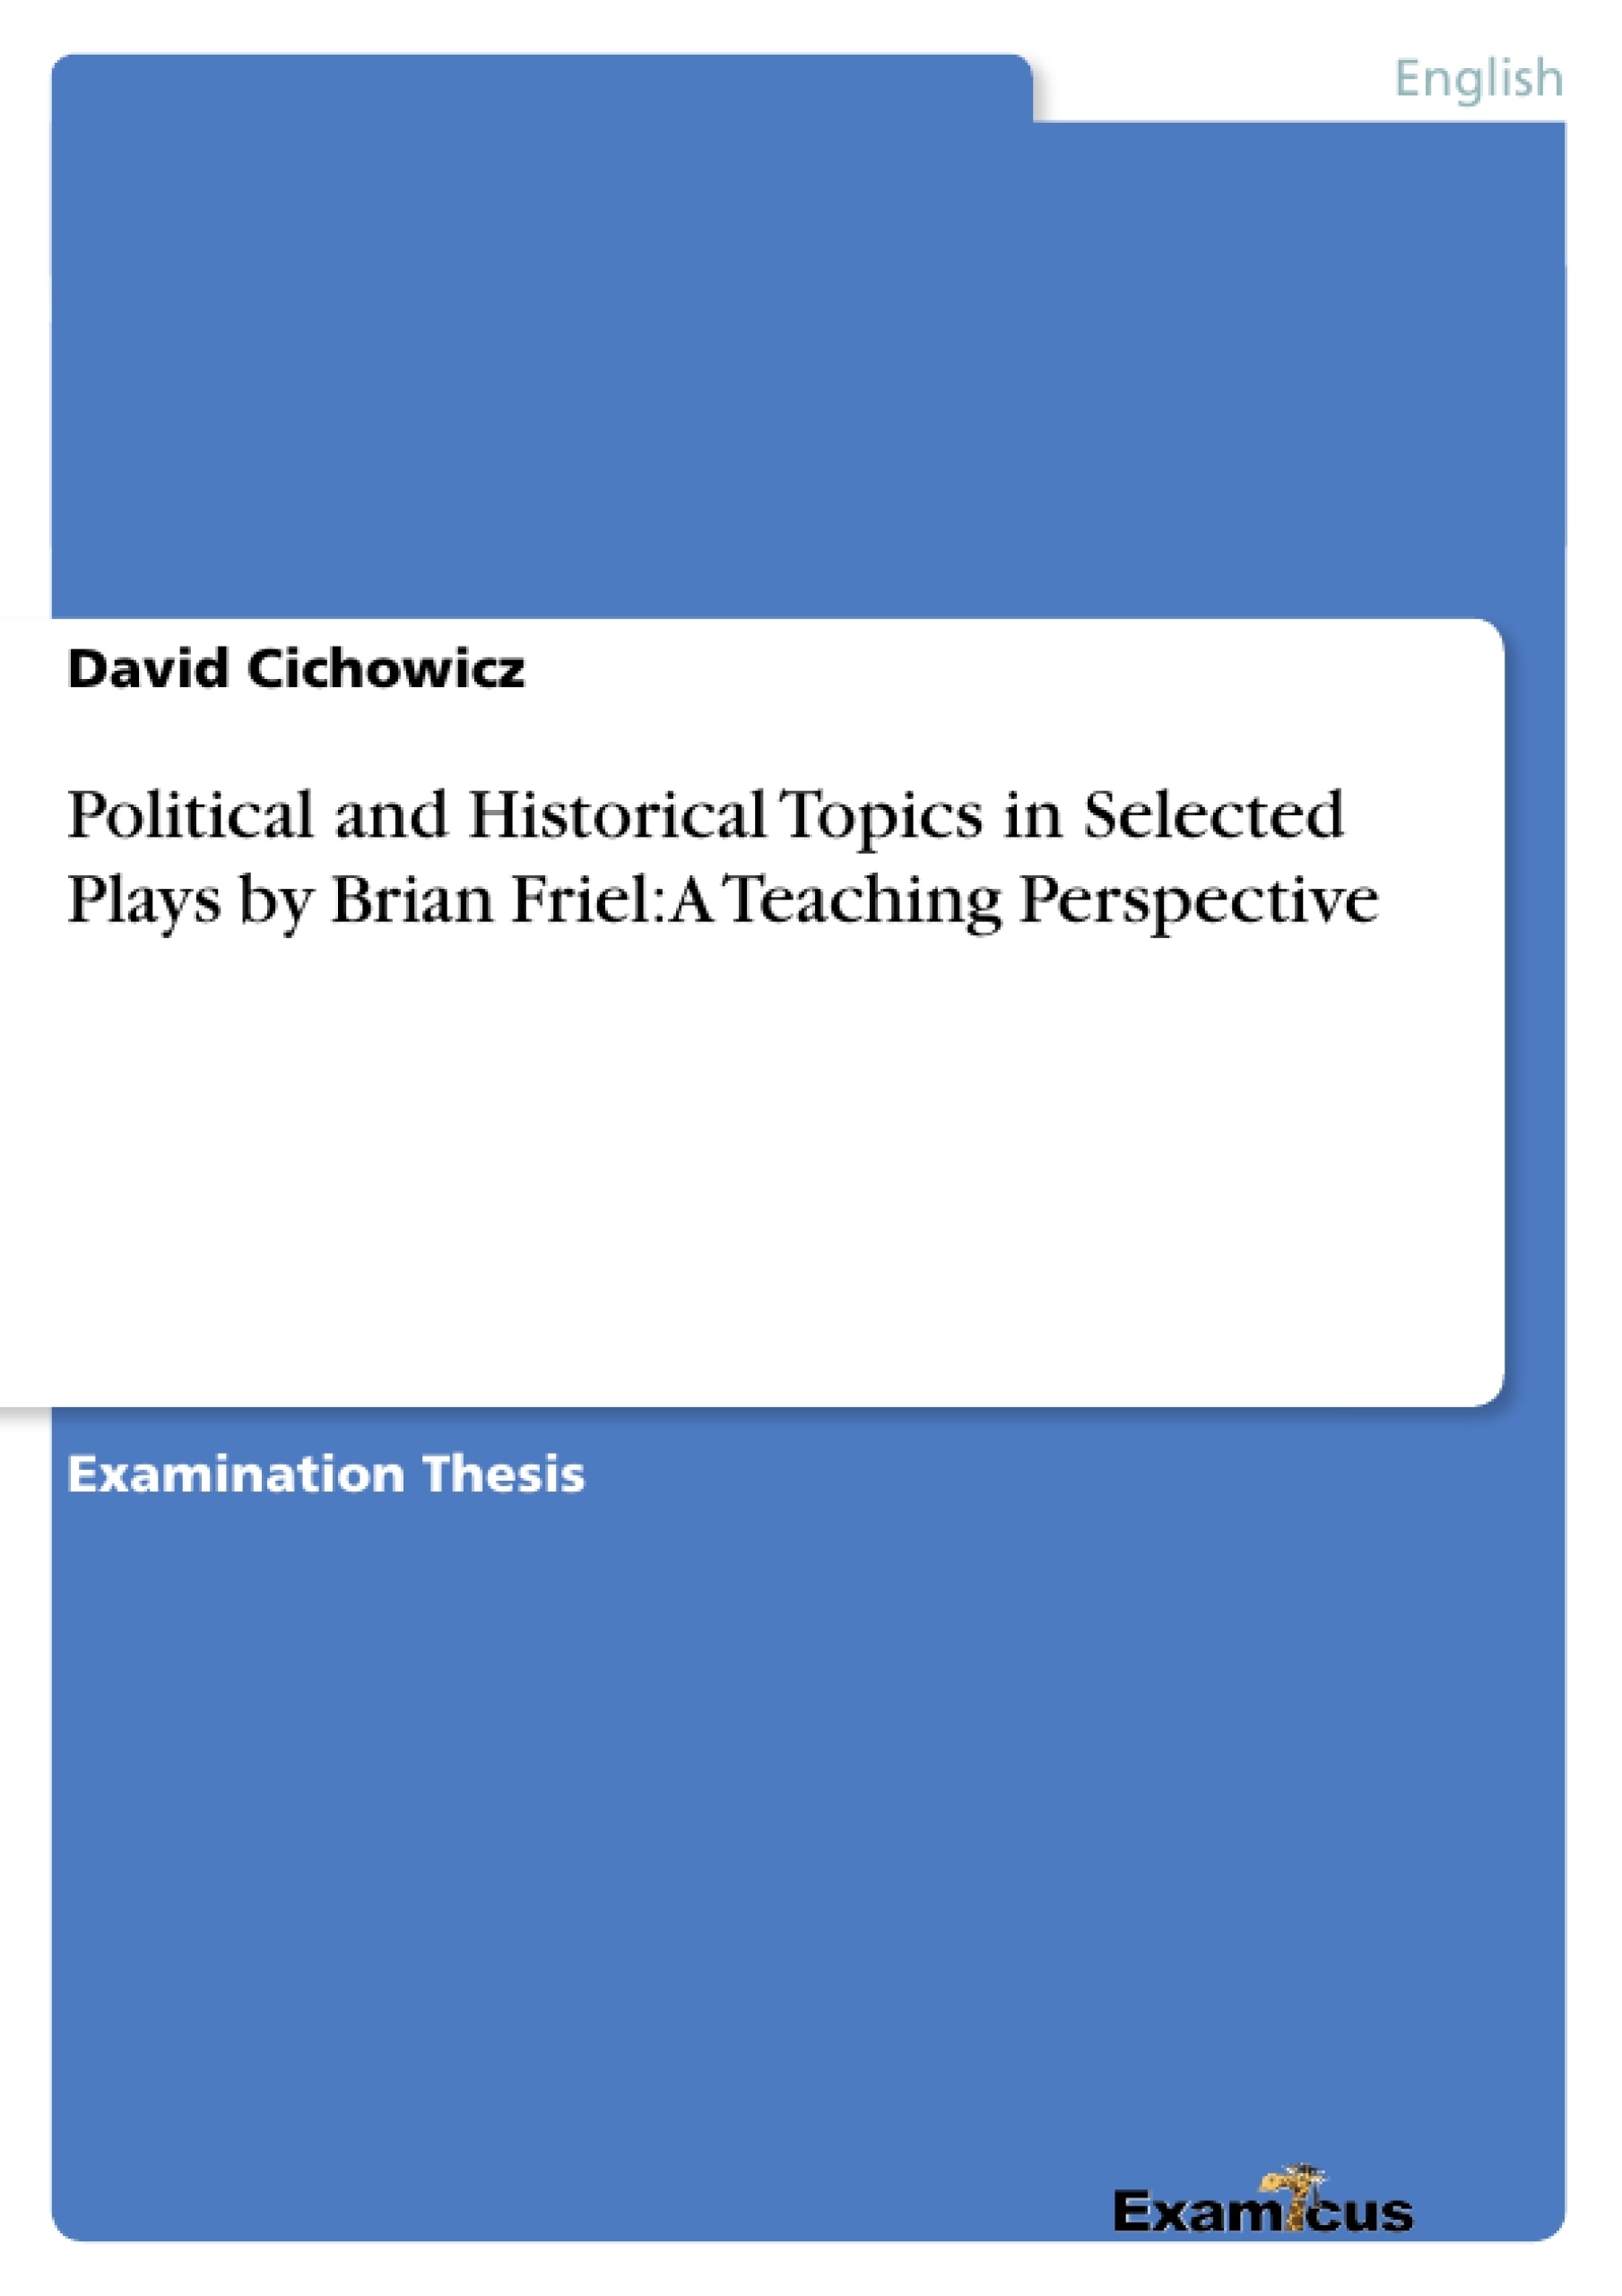 Título: Political and Historical Topics in Selected Plays by Brian Friel: A Teaching Perspective